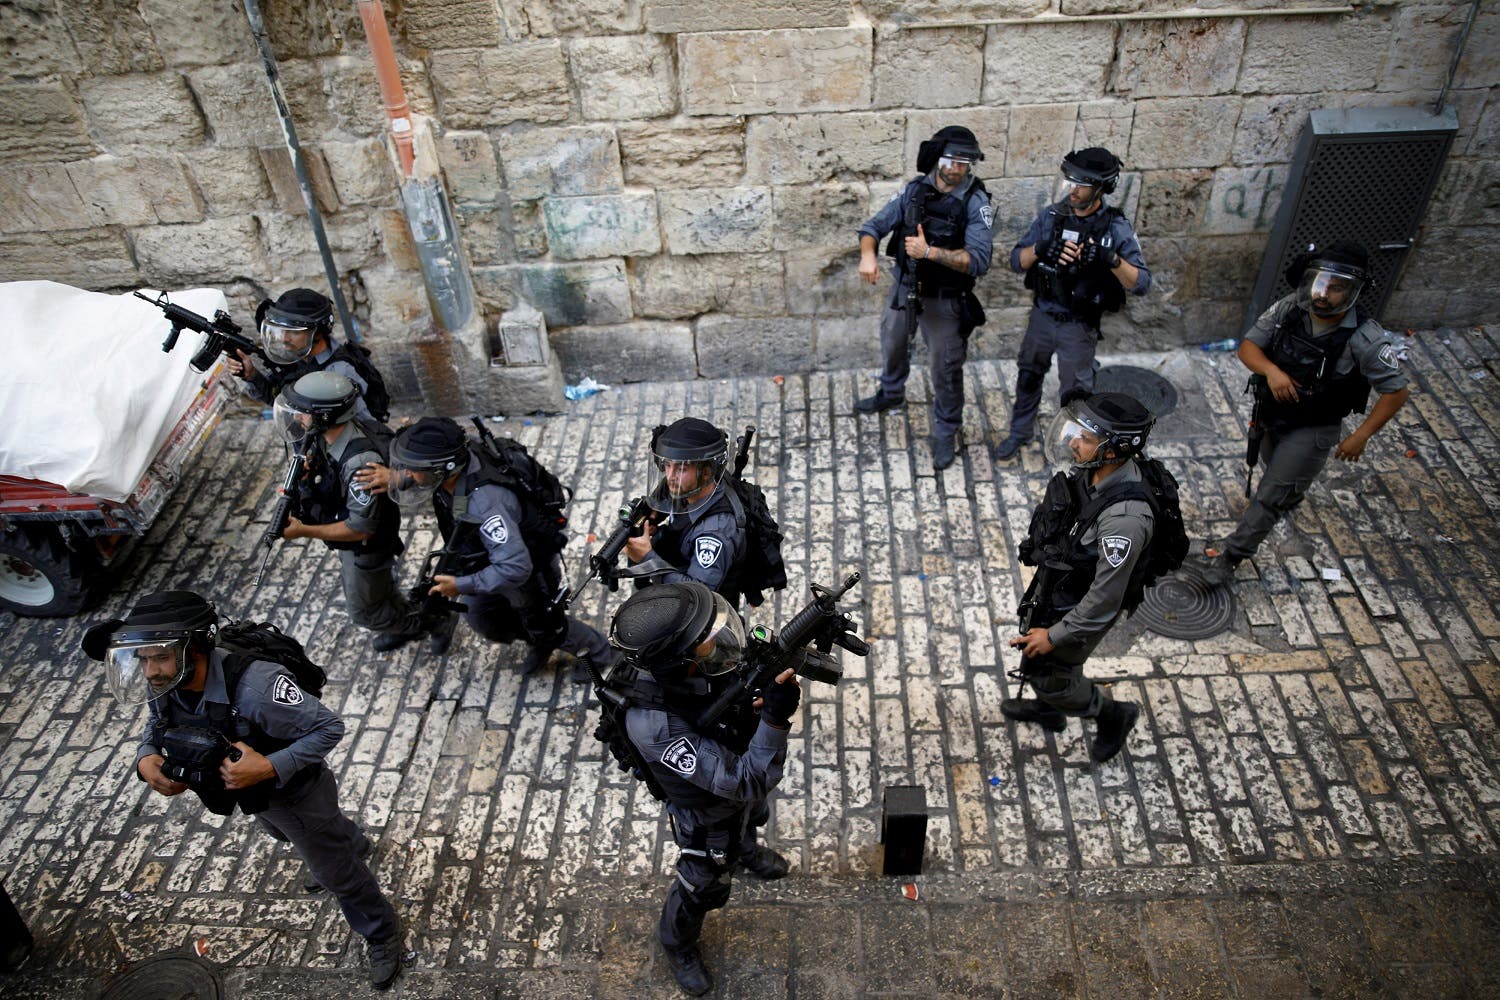 Israeli policemen guard a street at Jerusalem’s Old city outside the Noble Sanctuary compound, after Israel removed all security measures it had installed at the compound on July 27, 2017. (Reuters)